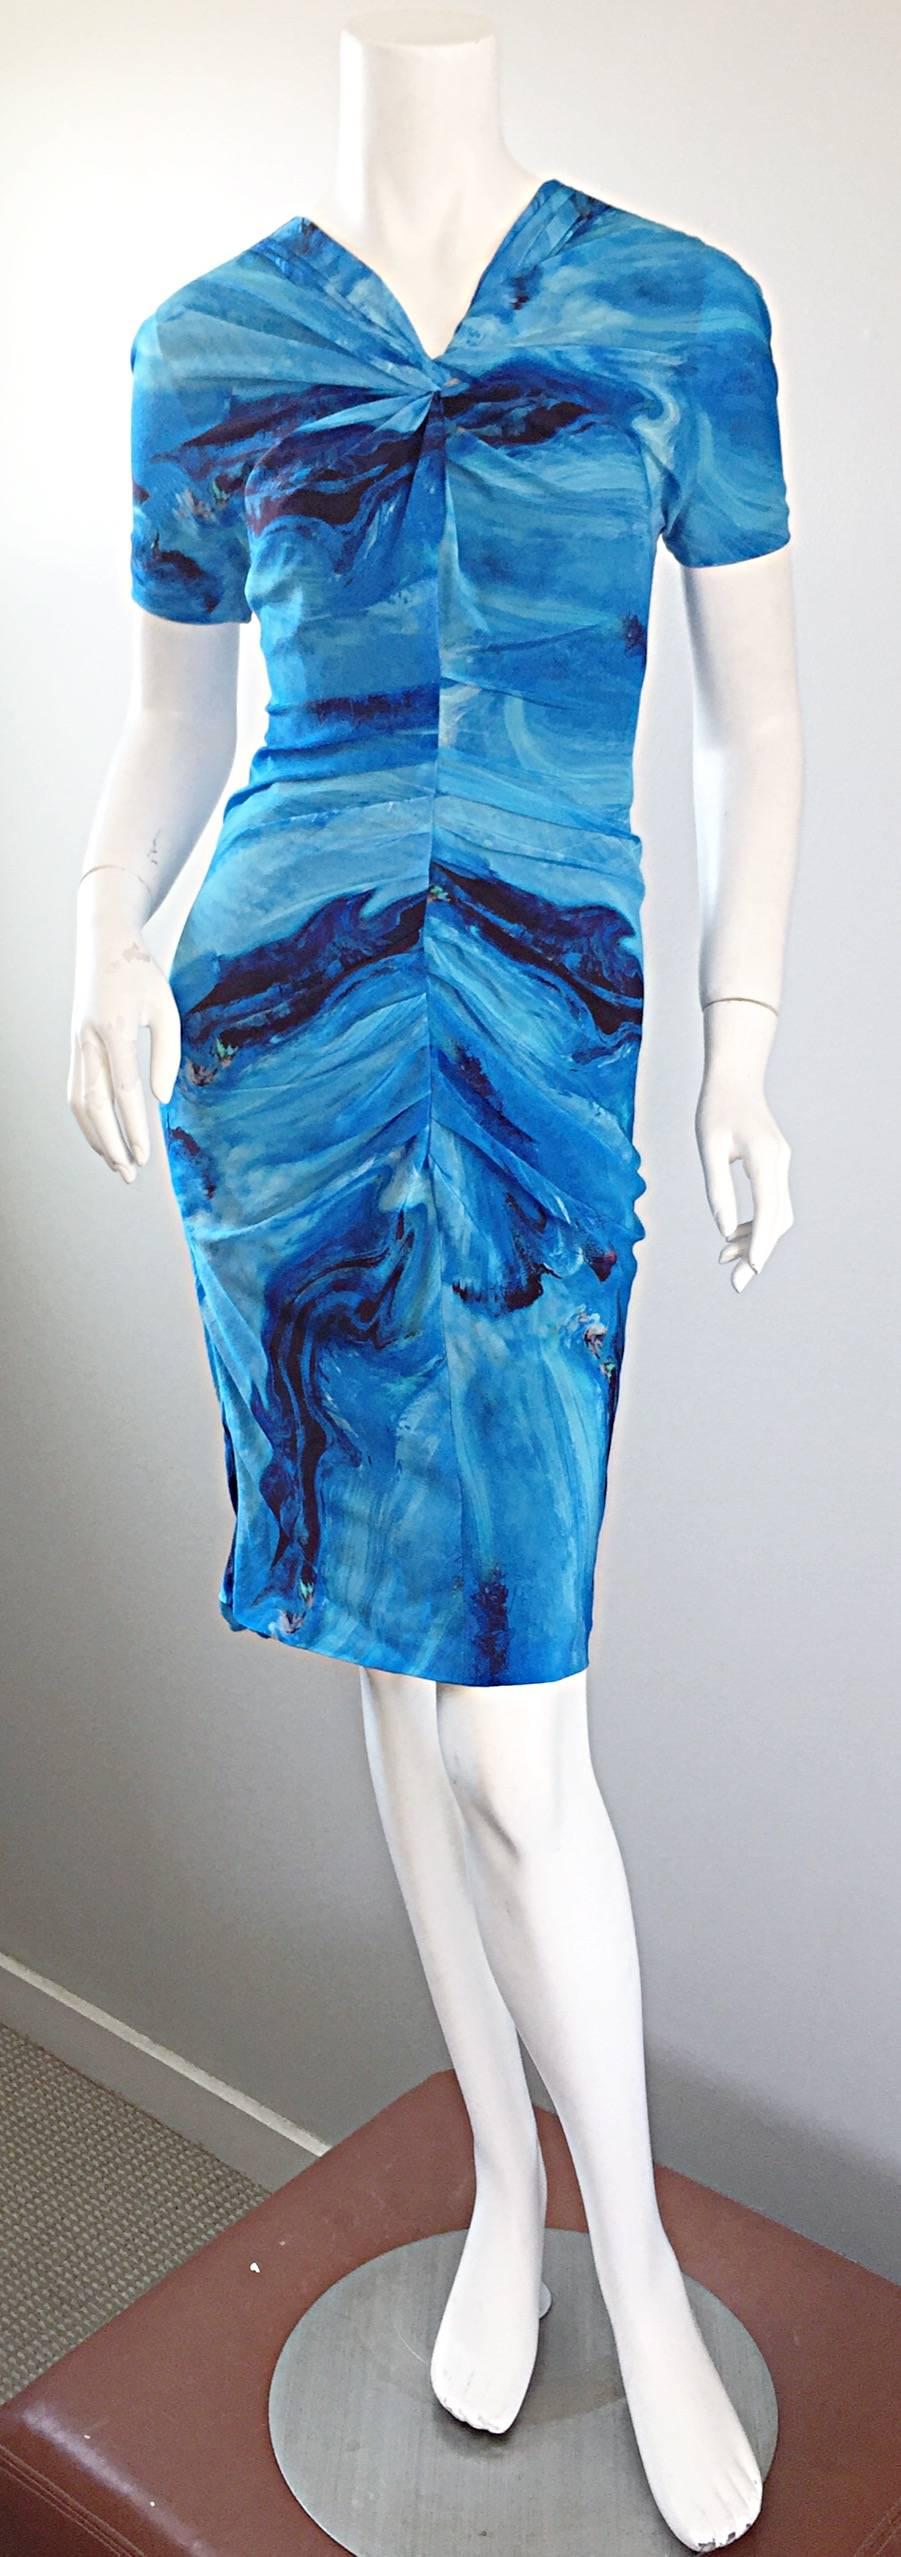 Amazing and rare vintage VERA WANG Collection silk ruched dress from 1995! Features an incredible vibrant blue 3-D watercolor ocean/wave print throughout, with speckles of colors sporadically to mirror sparkles from sunlight. Twisted neckline that